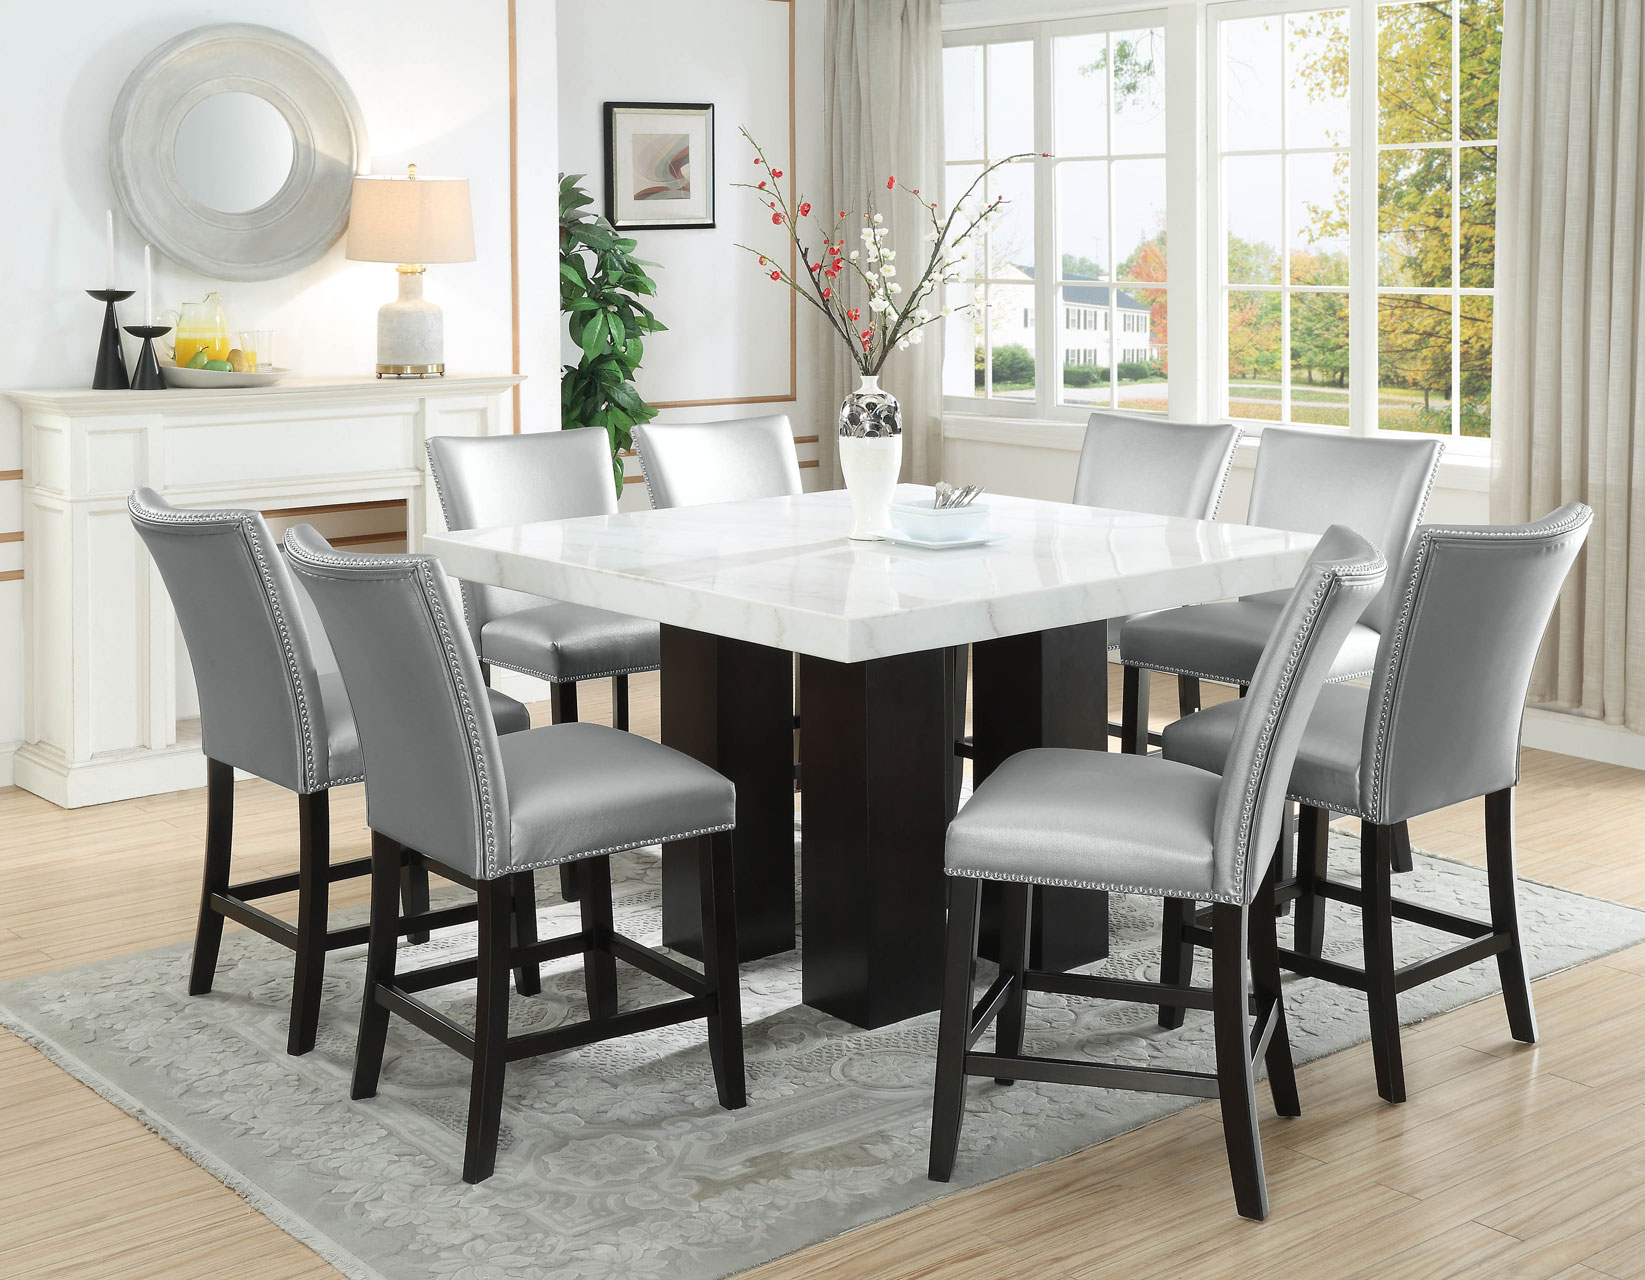 Linnett 6 Piece Set(Table, Bench, 2 Upholstered Side Chairs & 2 Side Chairs)